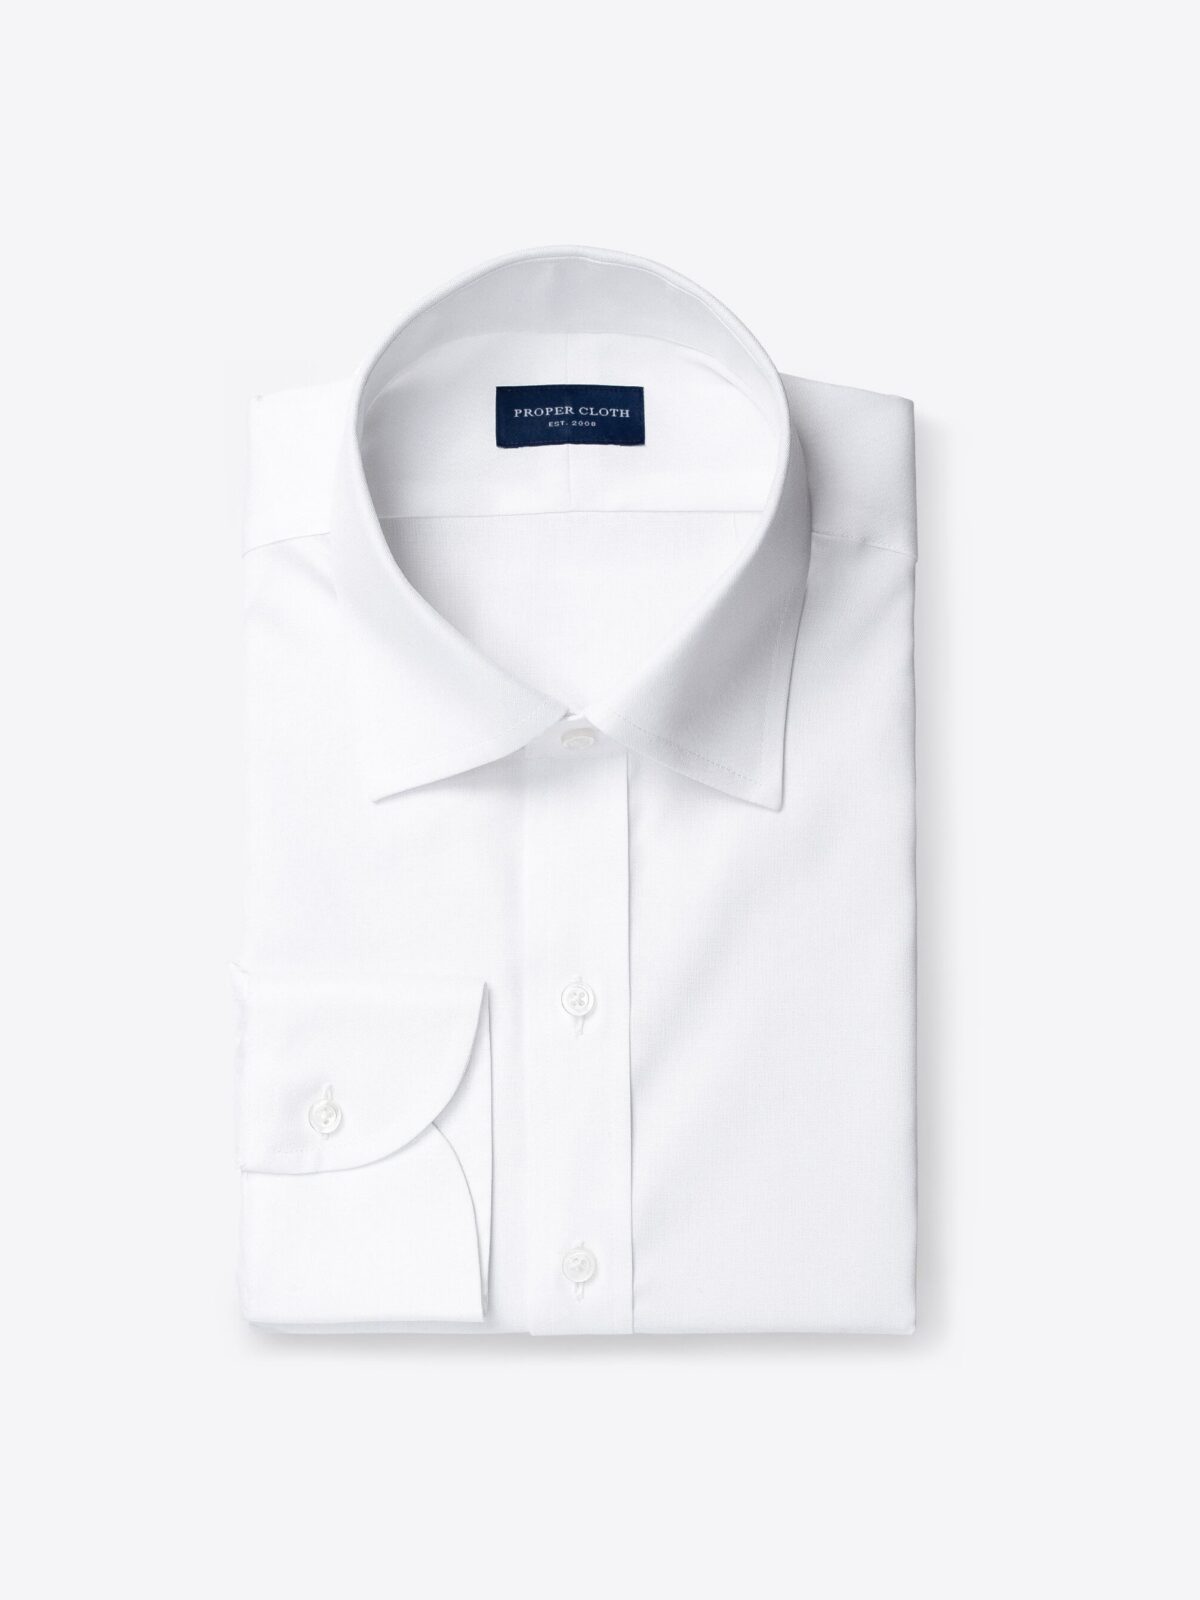 Proper Cloth - The shirt that can handle anything spring weather